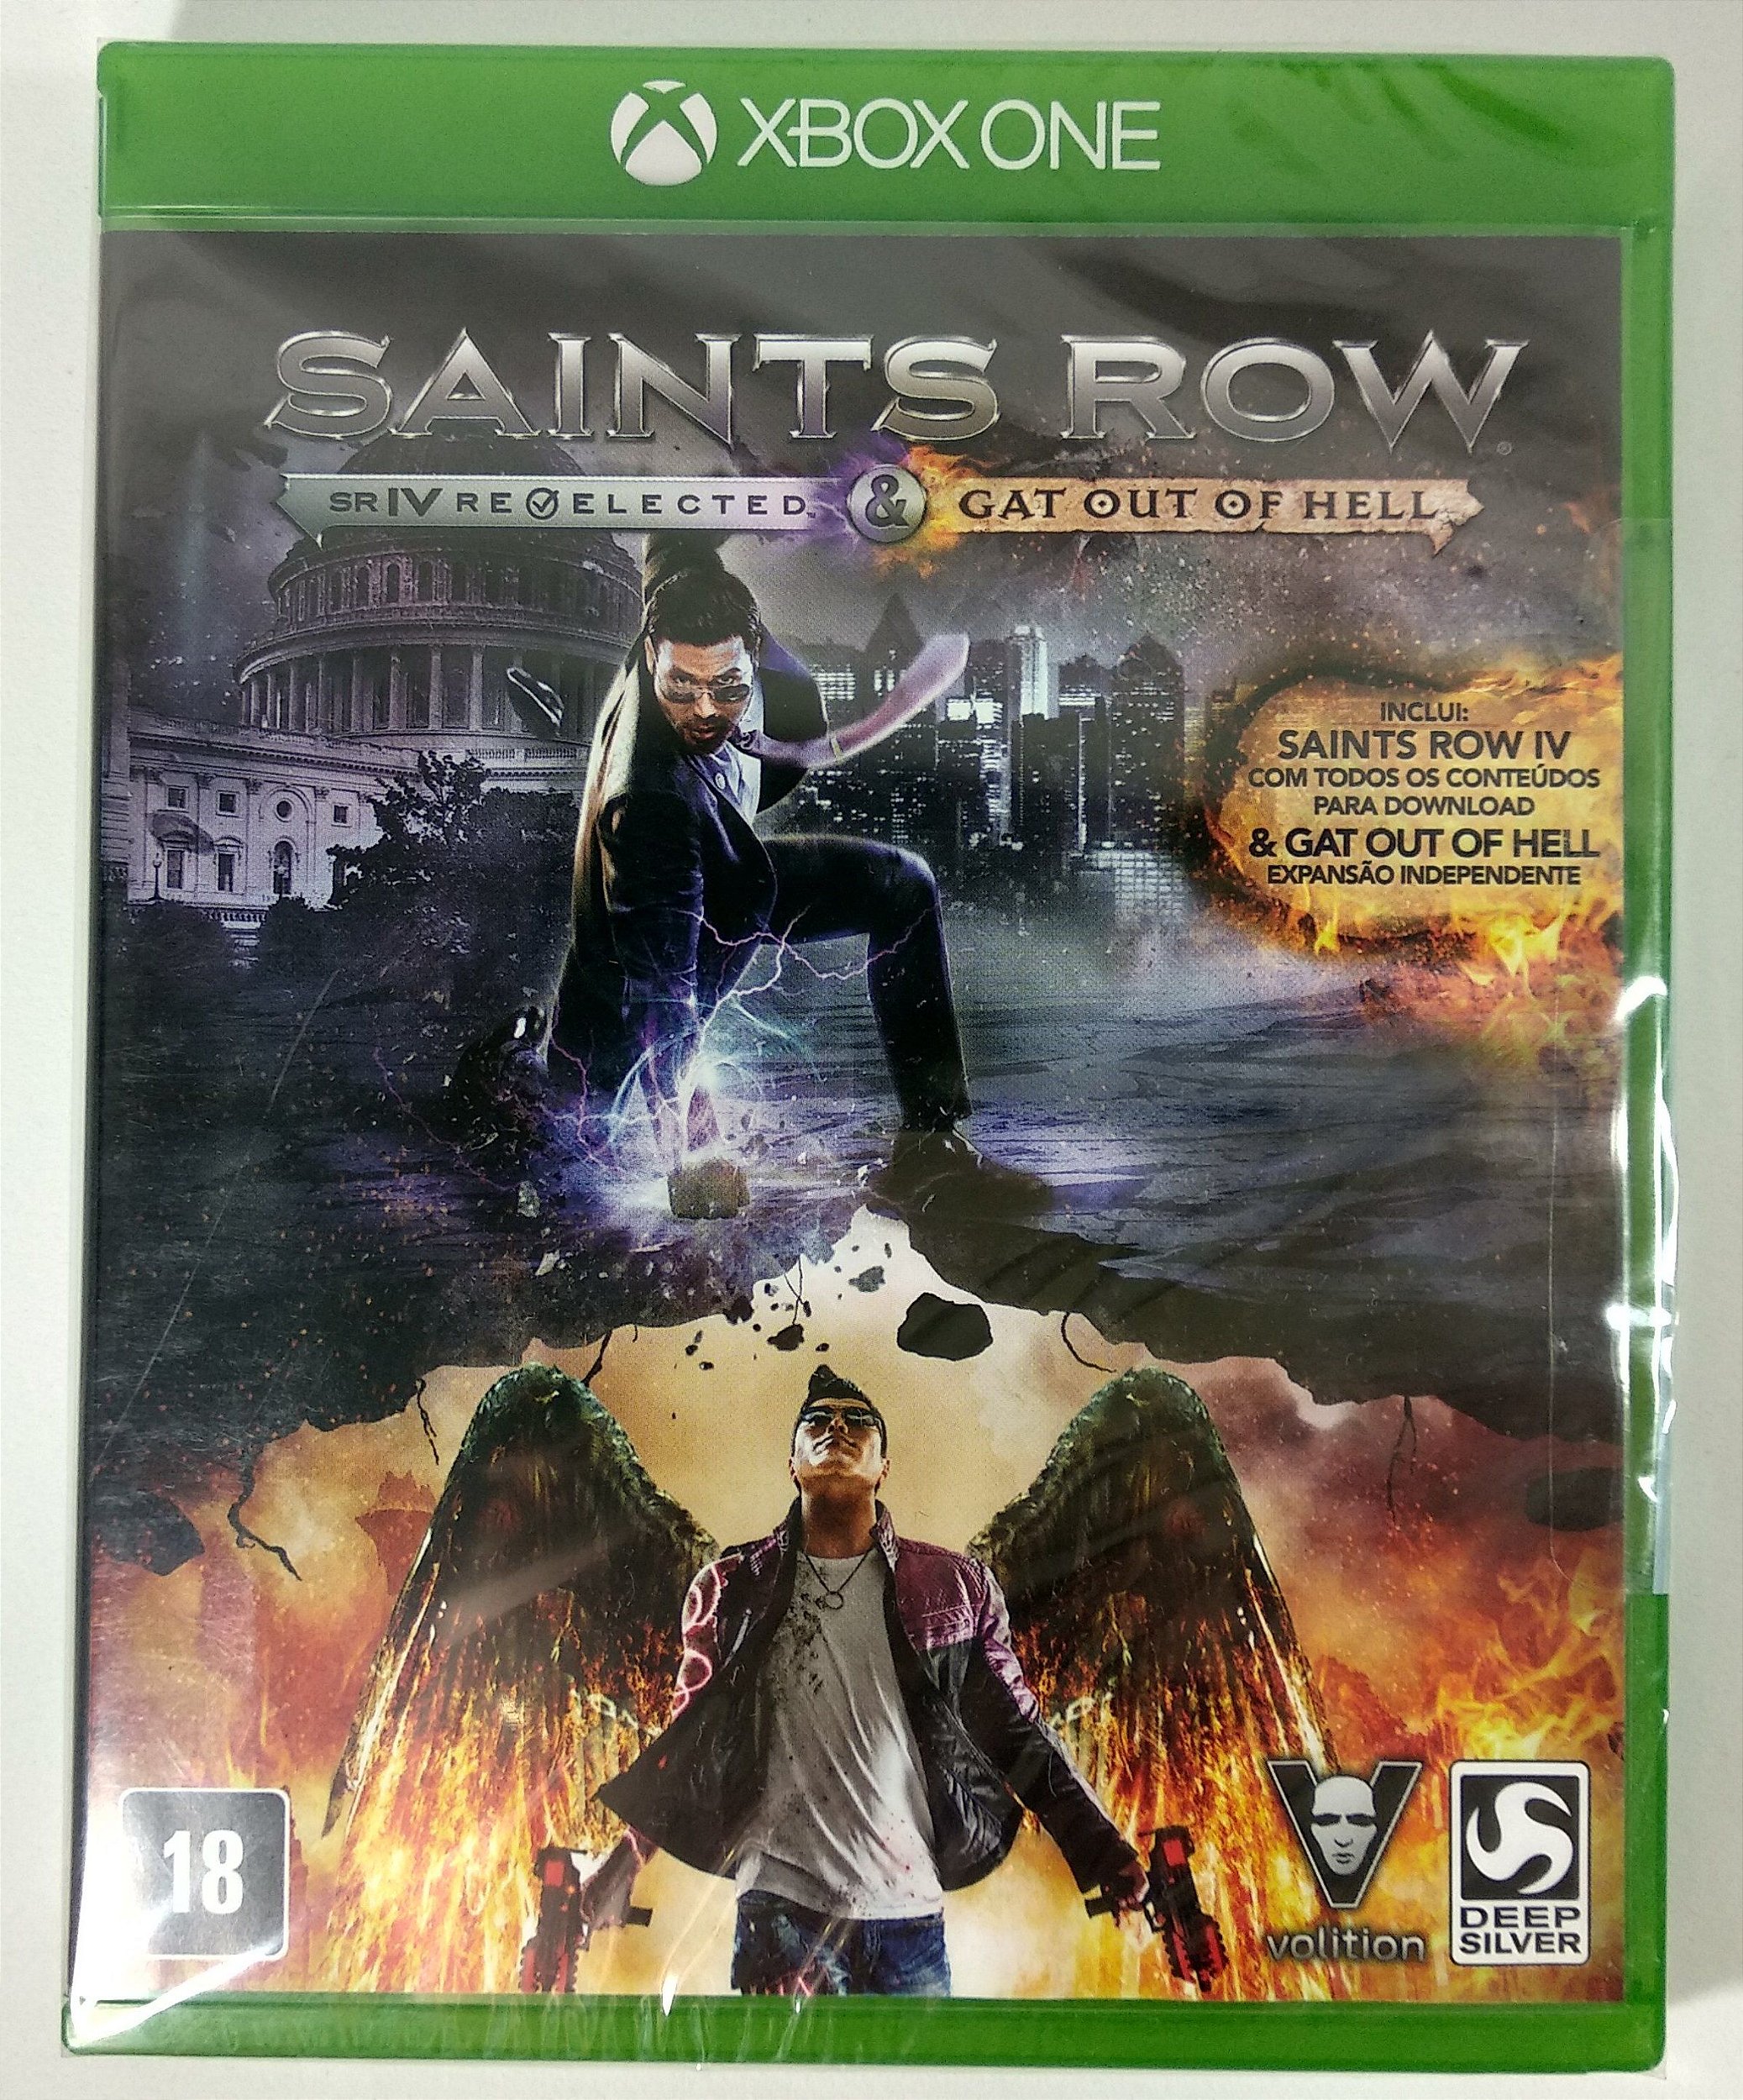 Buy Saints Row IV: Re-Elected & Gat out of Hell